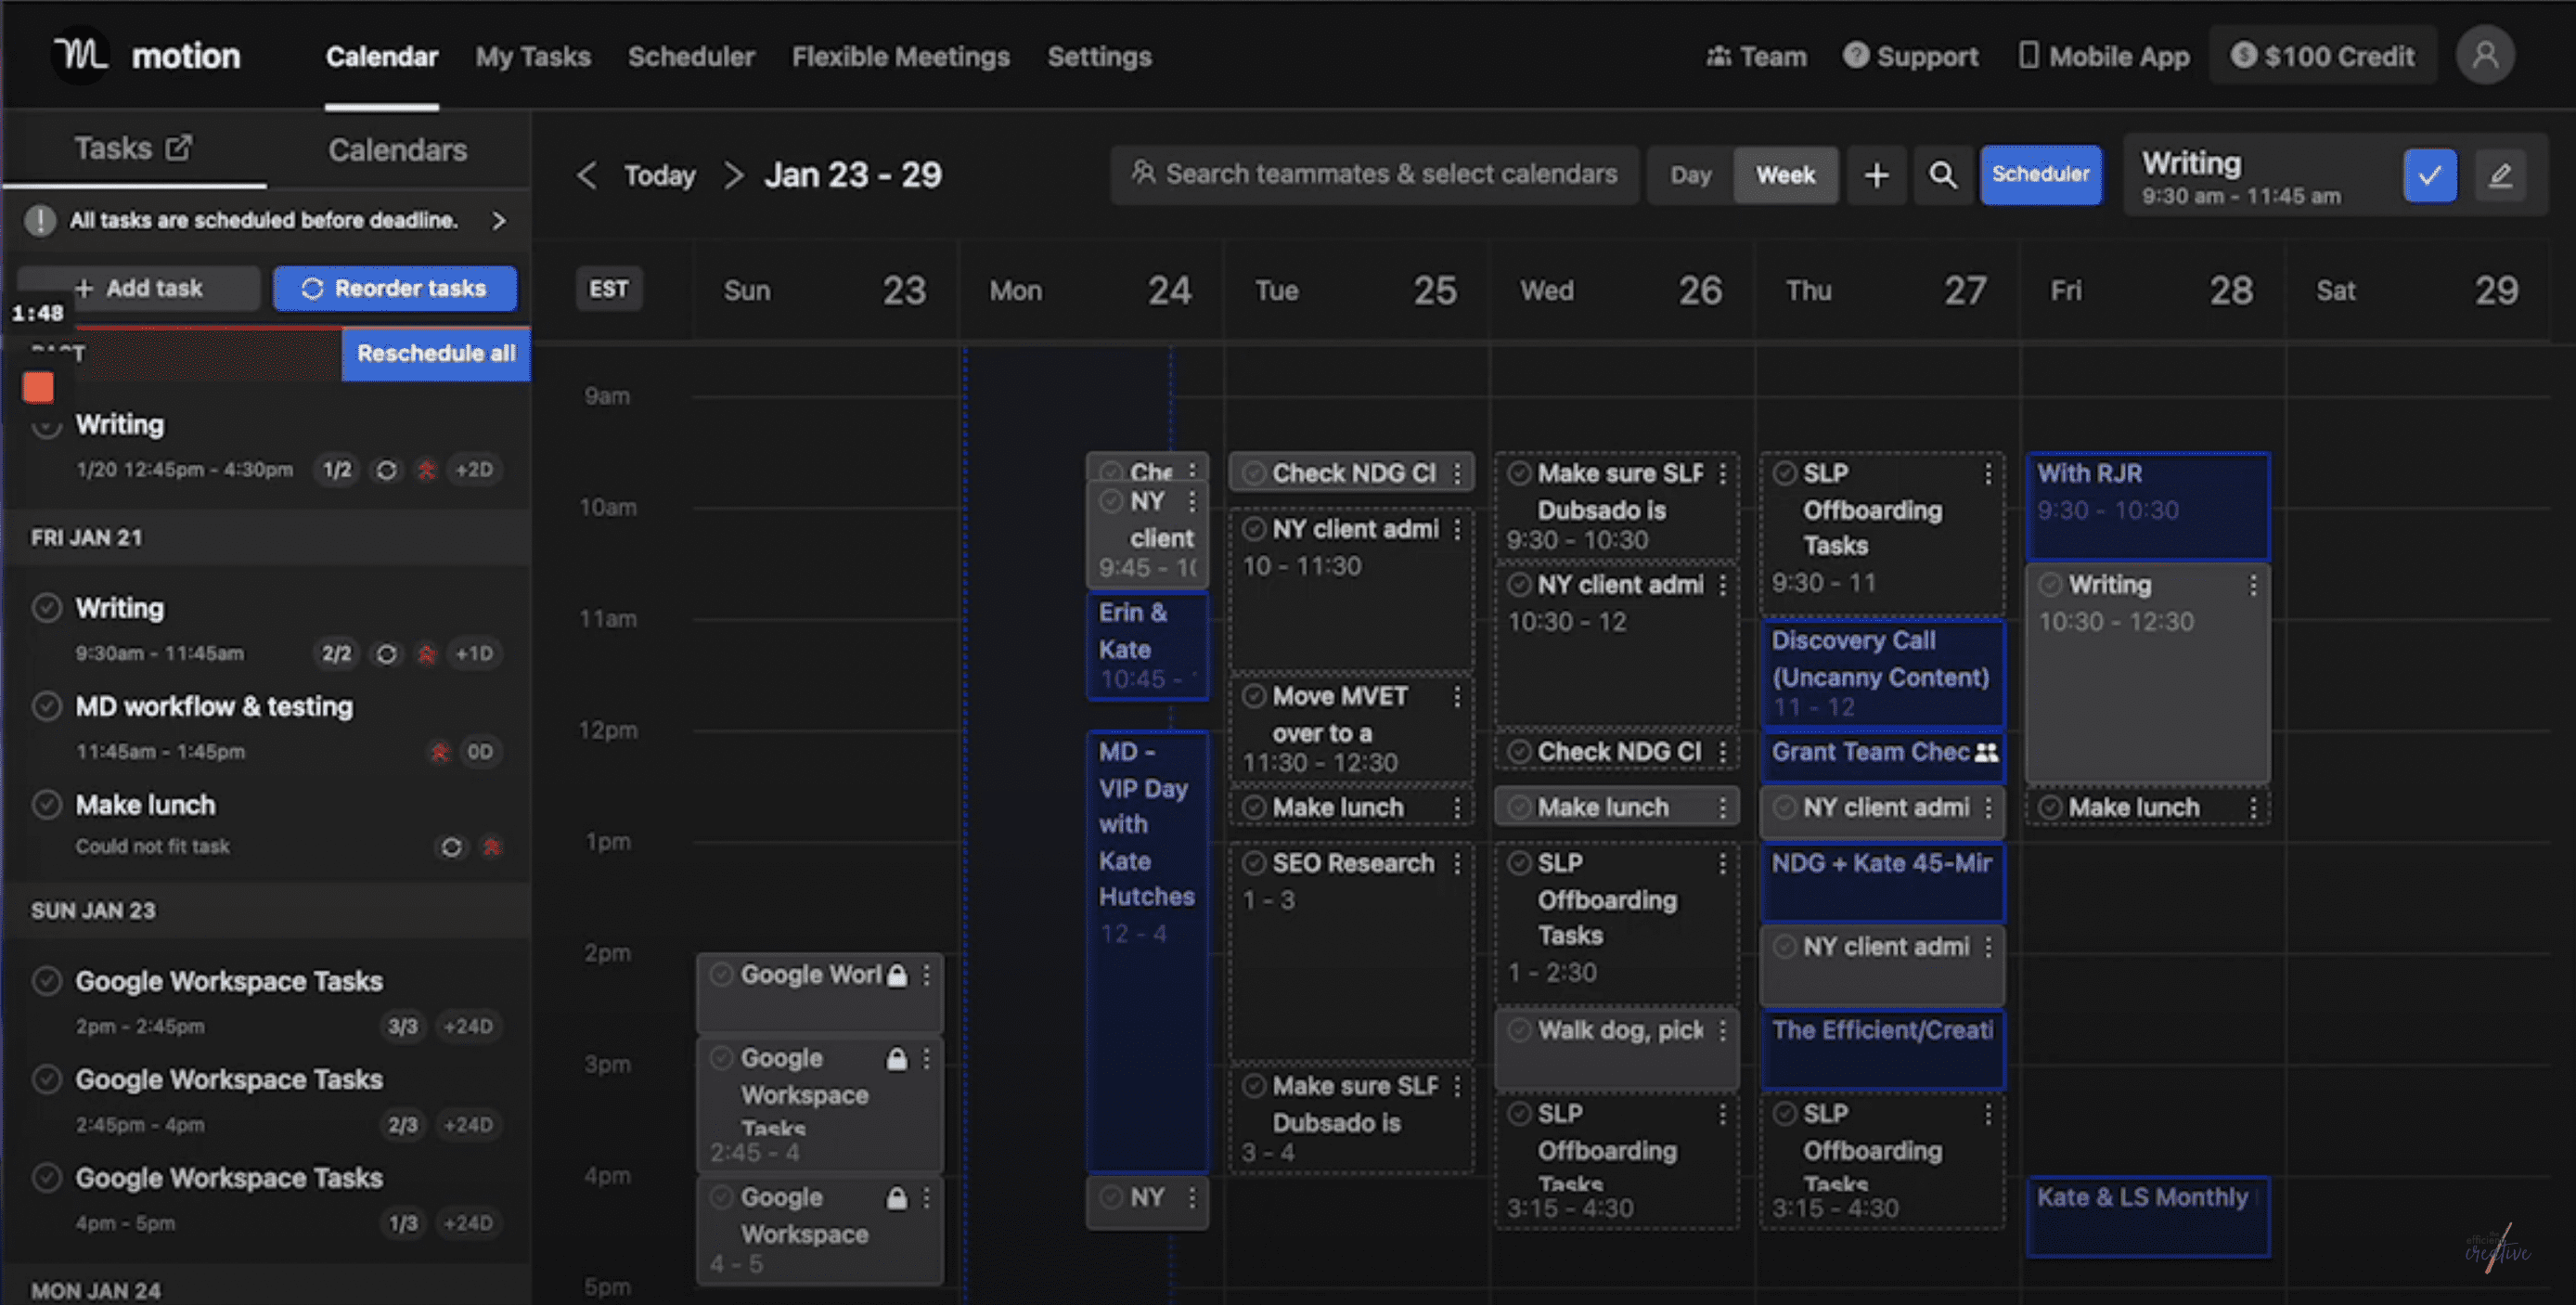 view of my motion app calendar with tasks and meetings scheduled